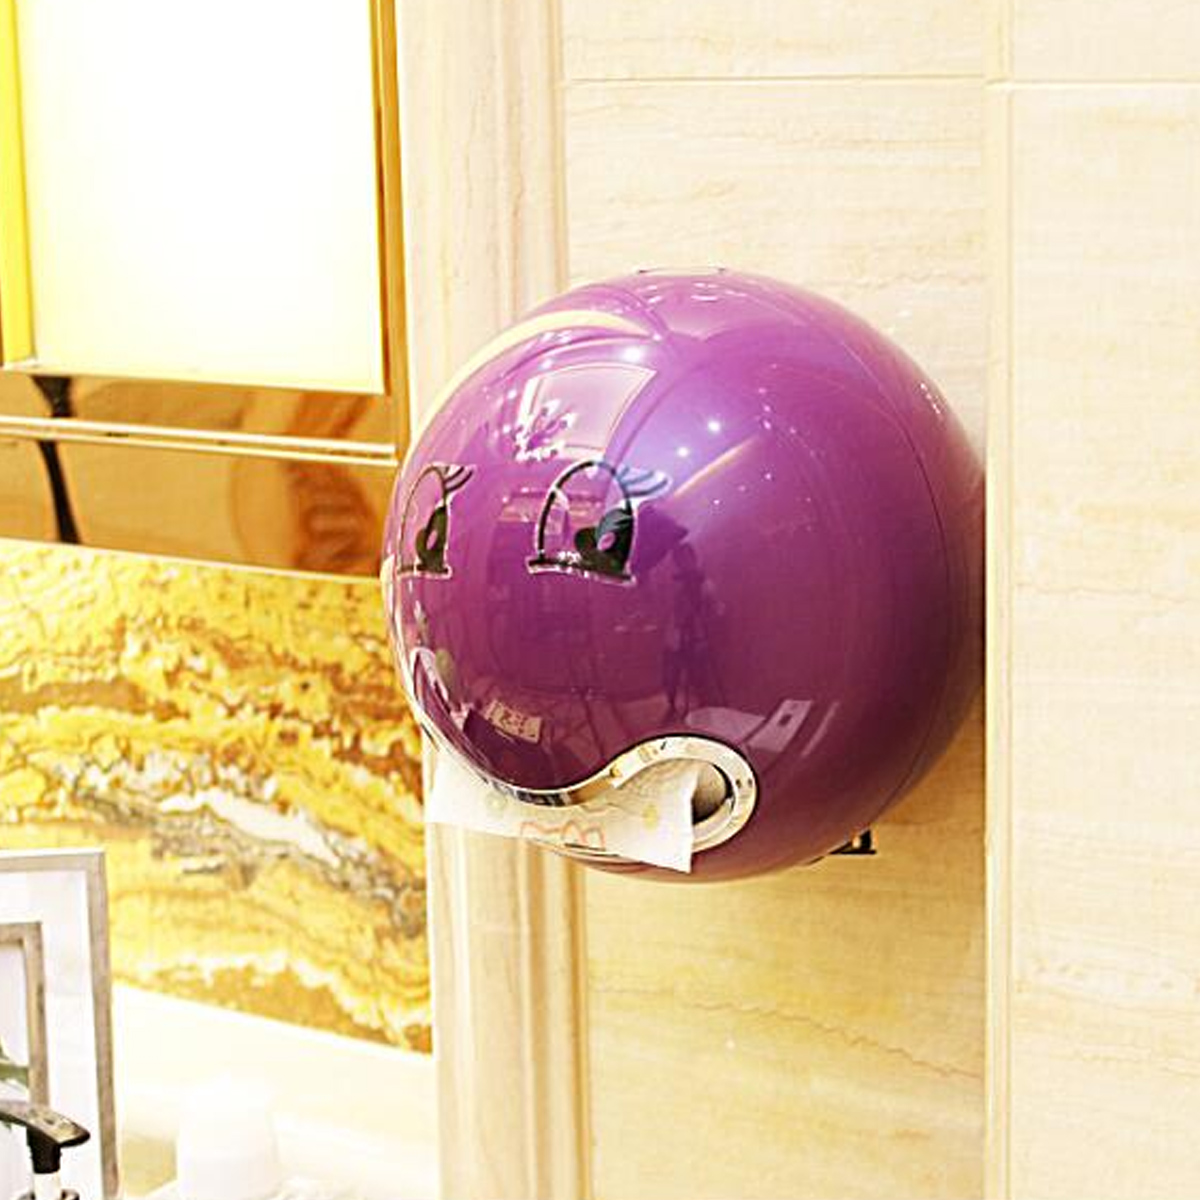 Bathroom-Ball-Shaped-Face-Wall-Mounted-Tissue-Holder-Toilet-Roll-Paper-Box-Paper-Shelf-Holder-1634911-6